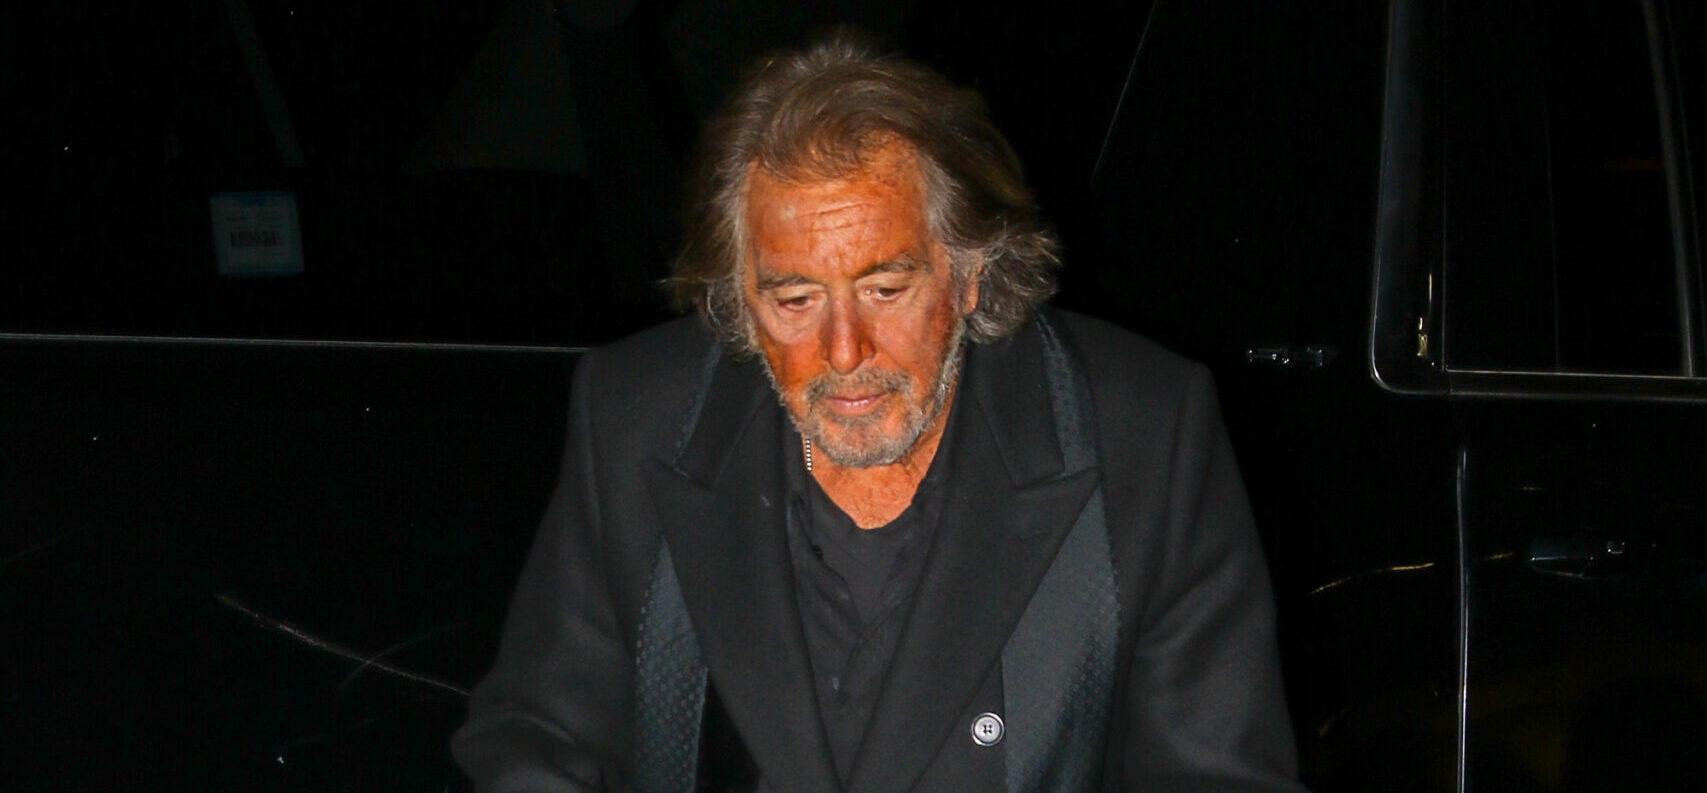 Al Pacino Took Steps To Ensure He Is Father of Baby With 29-Year-Old GF